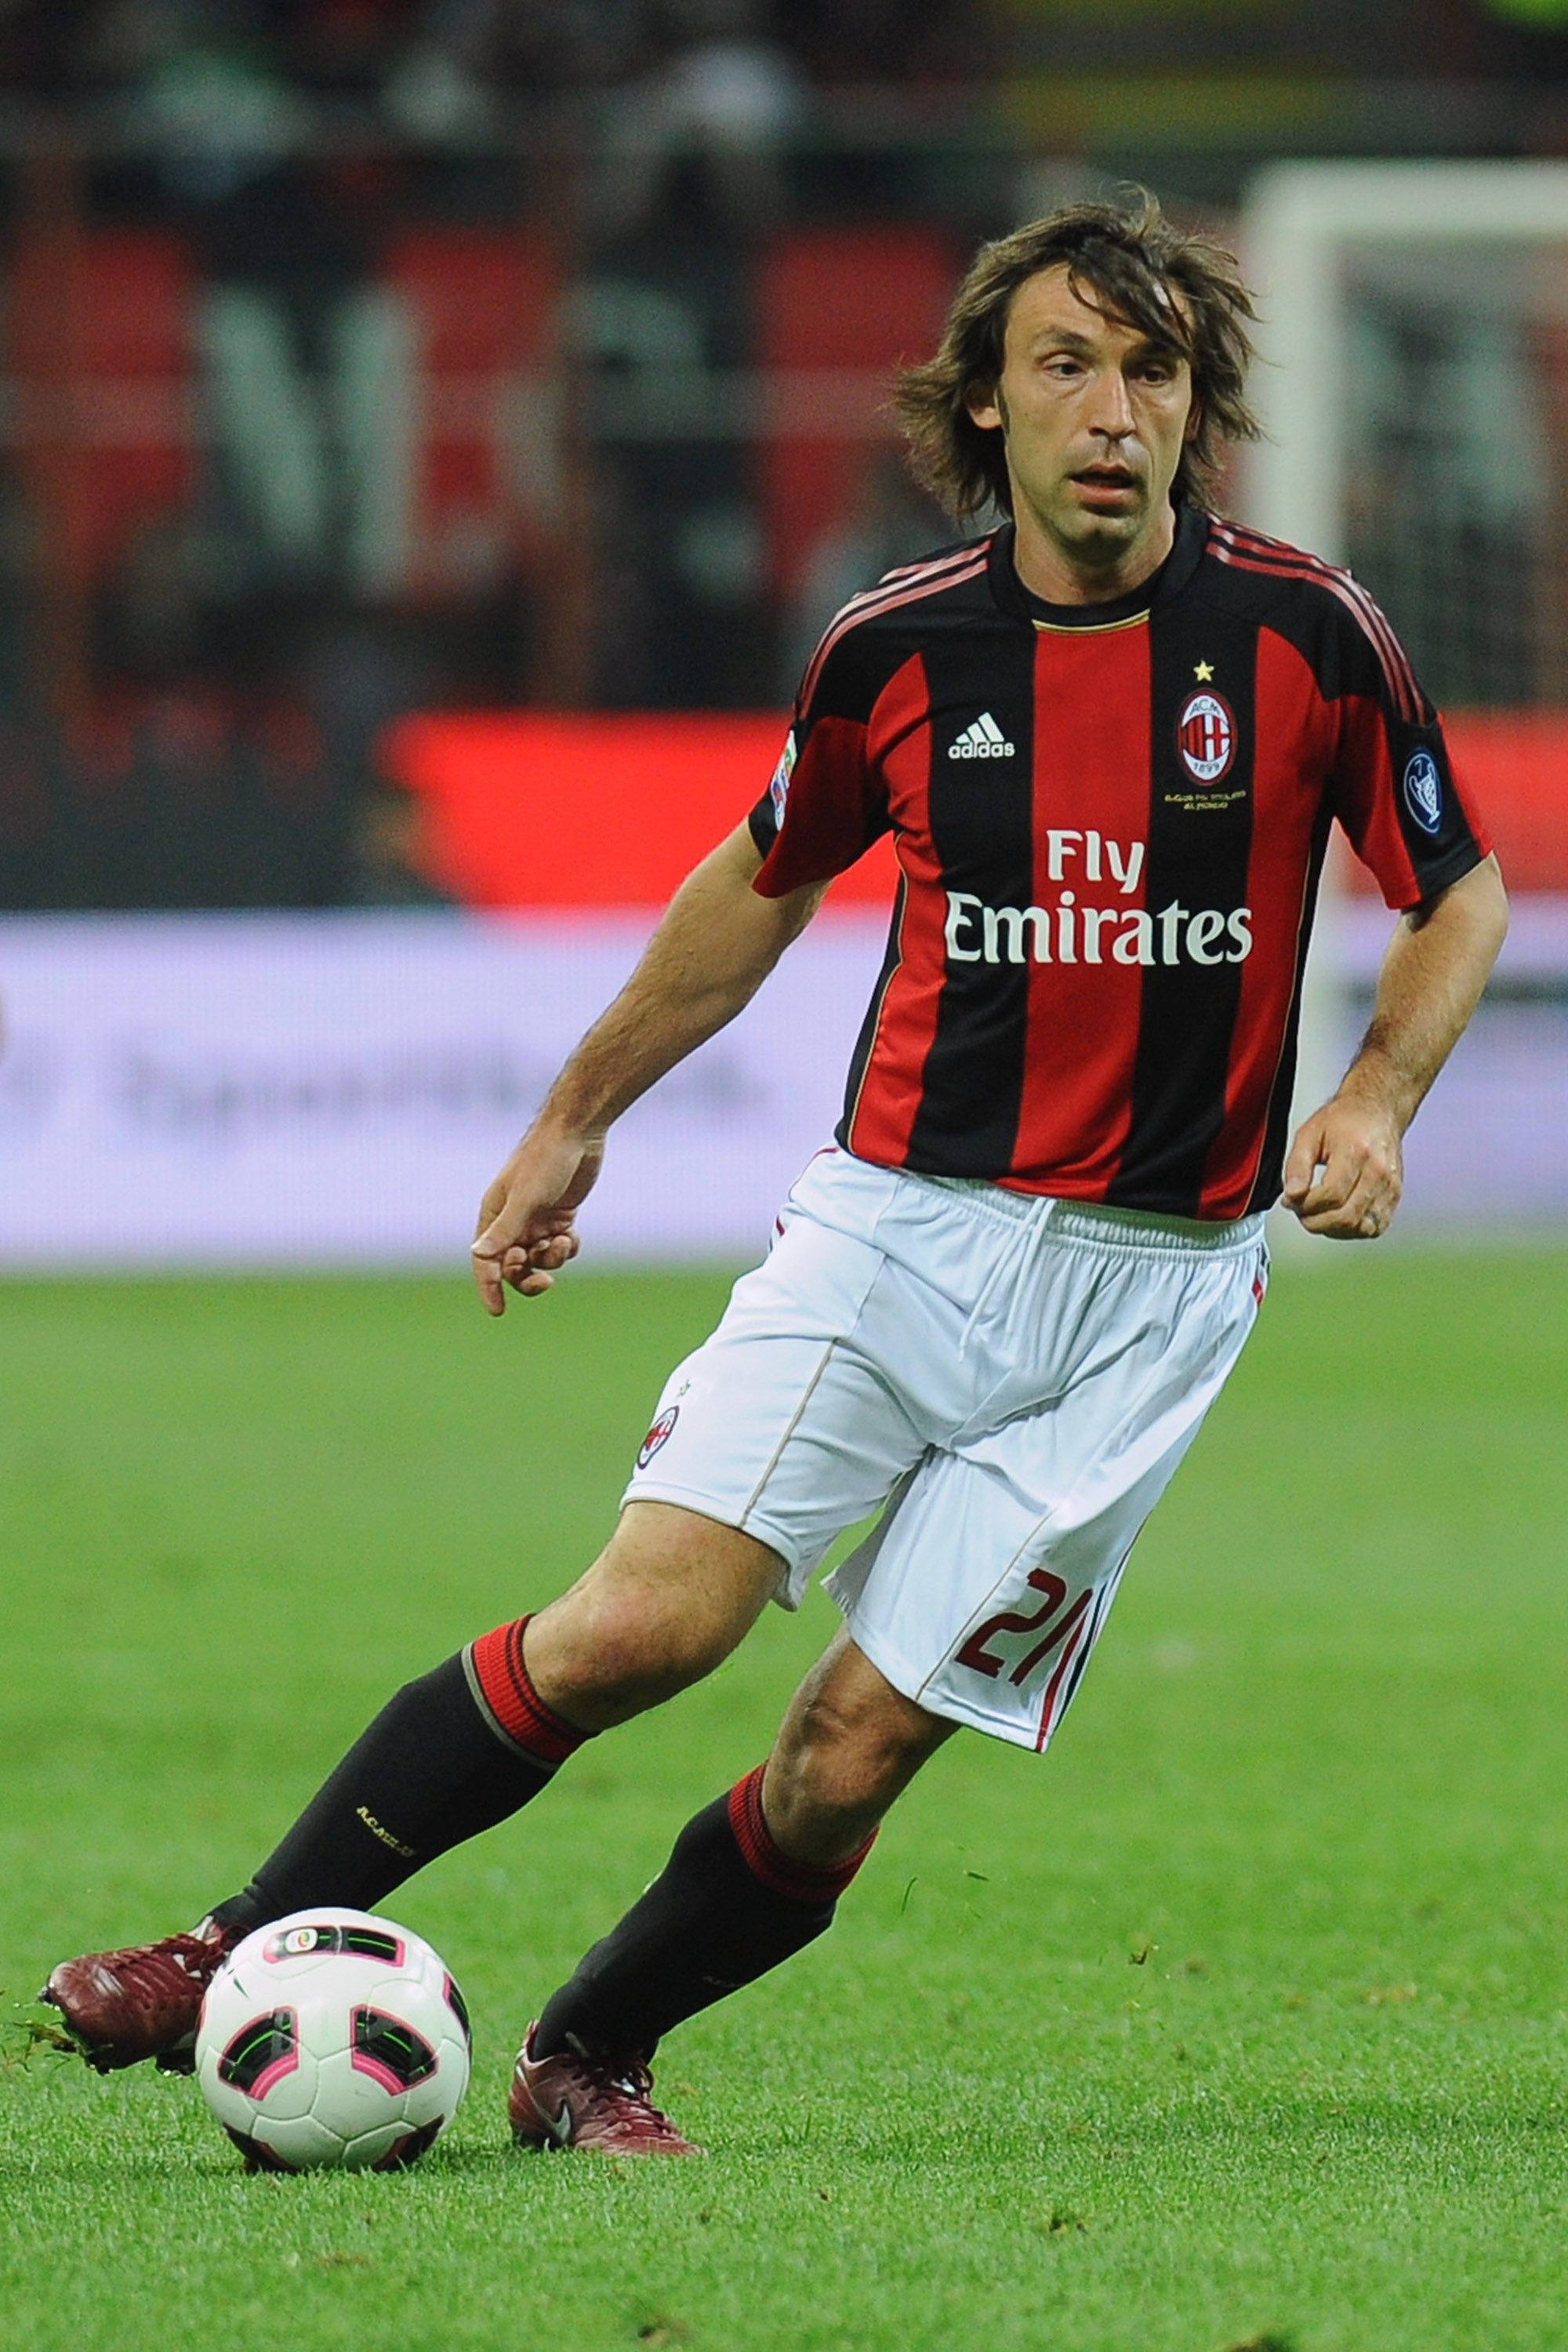 MILAN, ITALY - APRIL 16:  Andrea Pirlo of AC Milan in action during the Serie A match between AC Milan and UC Sampdoria at Stadio Giuseppe Meazza on April 16, 2011 in Milan, Italy.  (Photo by Valerio Pennicino/Getty Images)